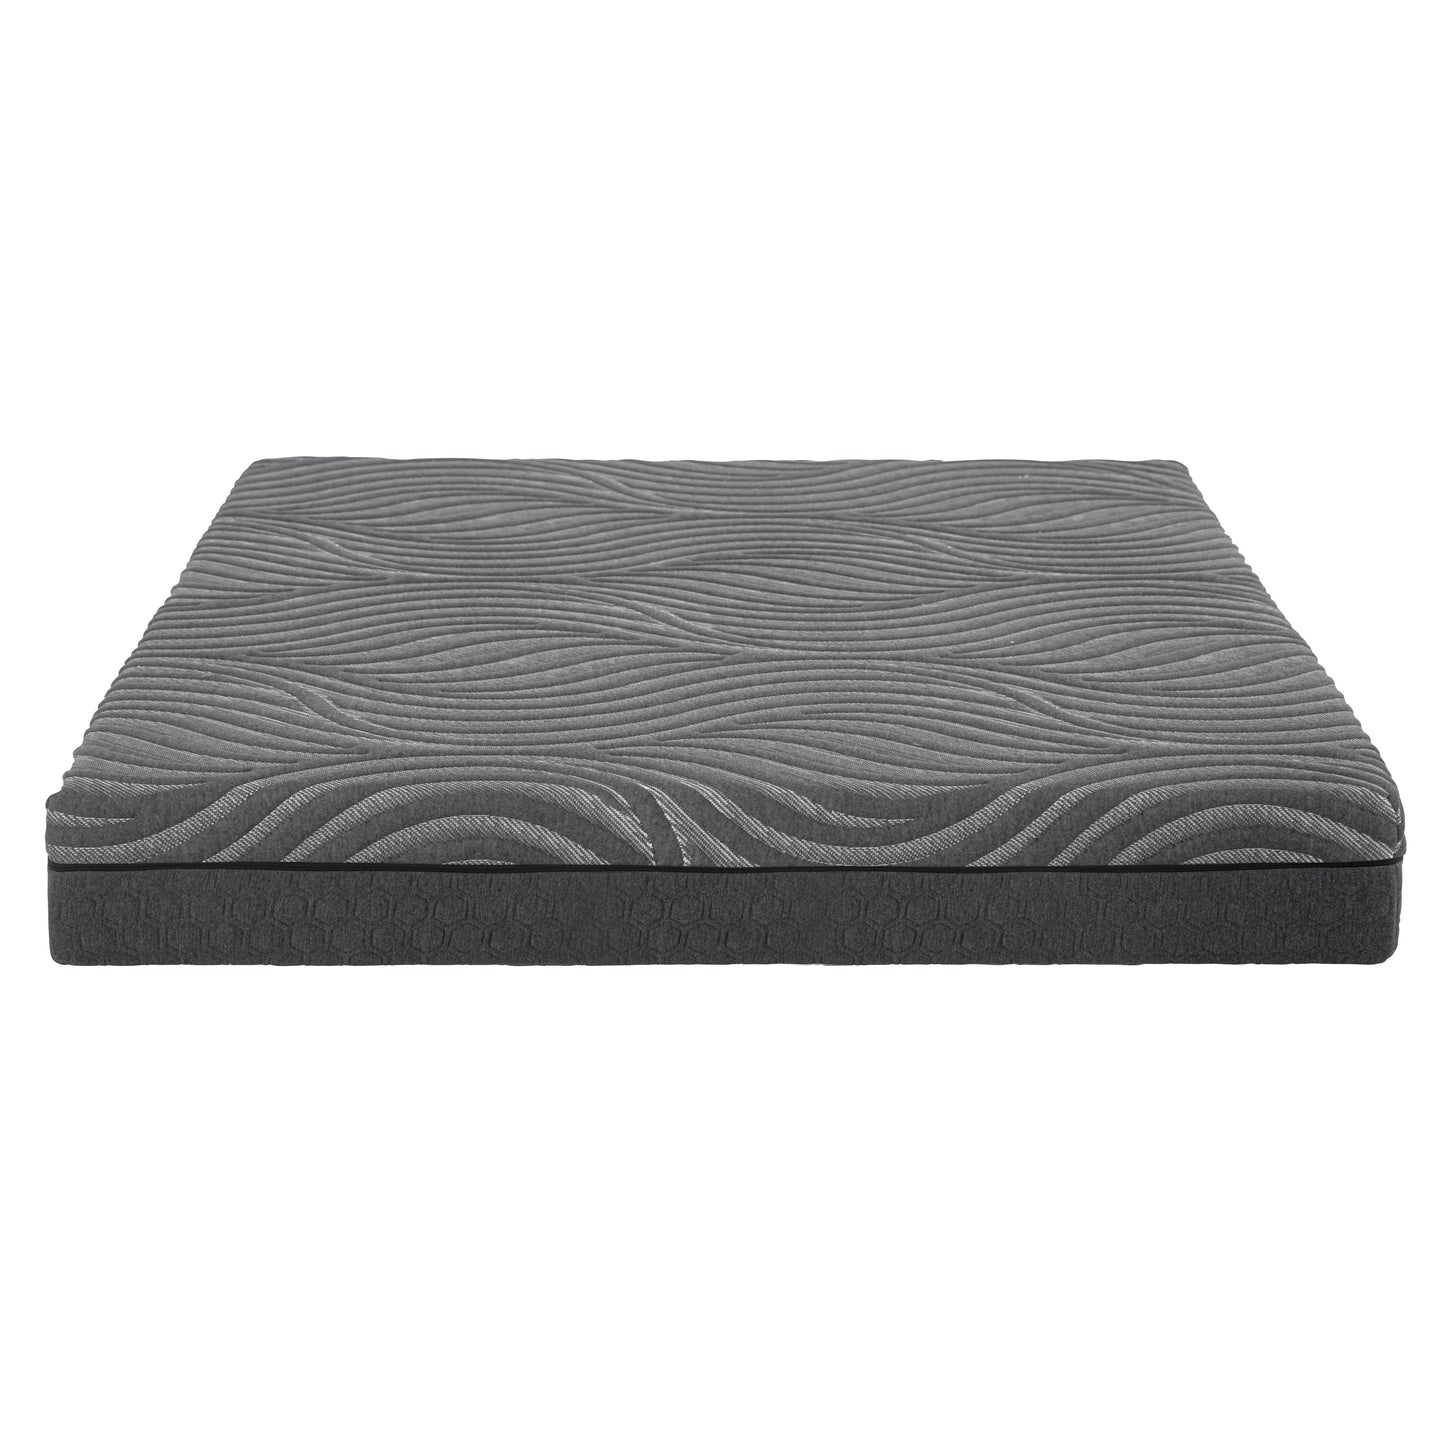 QUEEN 8'' Copper-Infused Memory Foam Hybrid-Taurus Collection